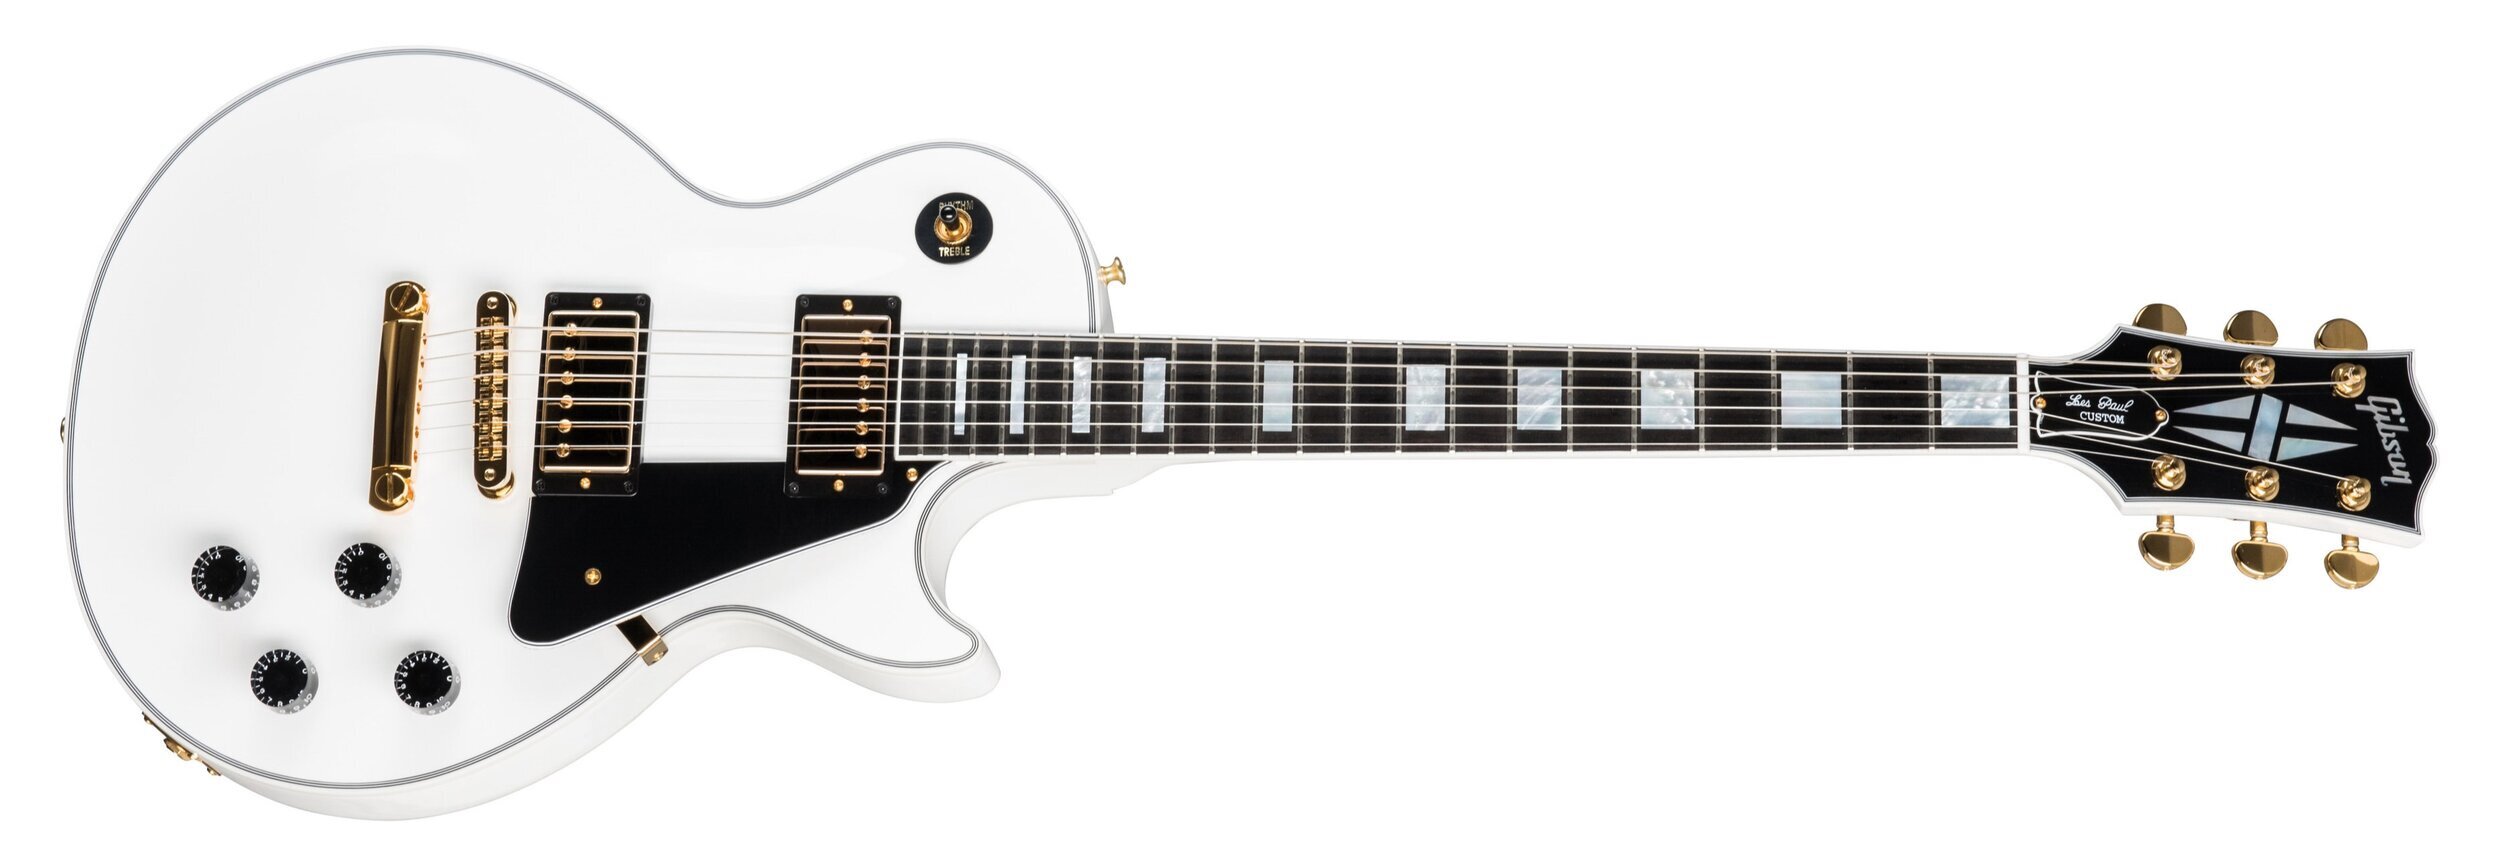 Gibson Les Paul Custom - a classic solid body guitar with a 2 piece maple cap over mahogany body